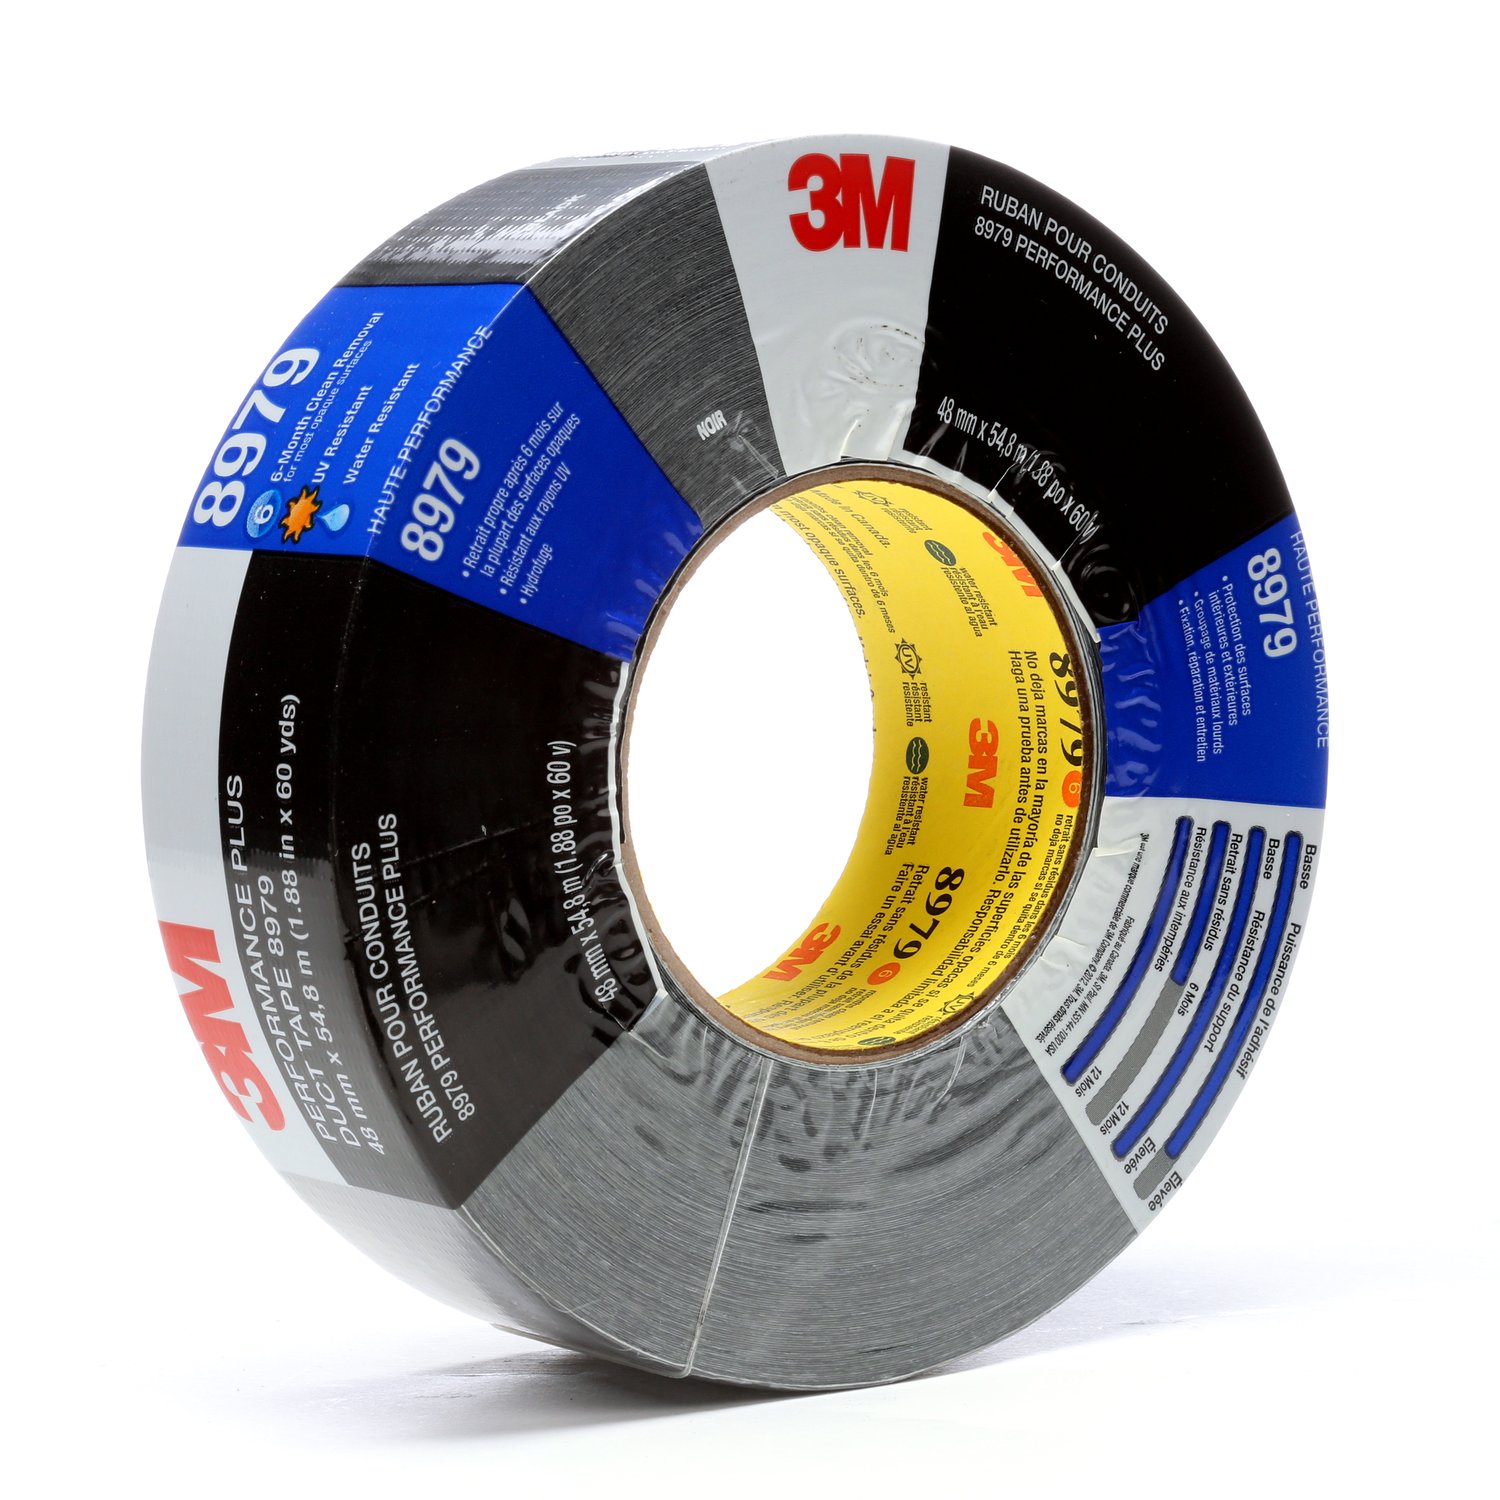 7000124266 - 3M Performance Plus Duct Tape 8979, Black, 48 mm x 54.8 m, 12.1 mil, 24
Roll/Case, Conveniently Packaged